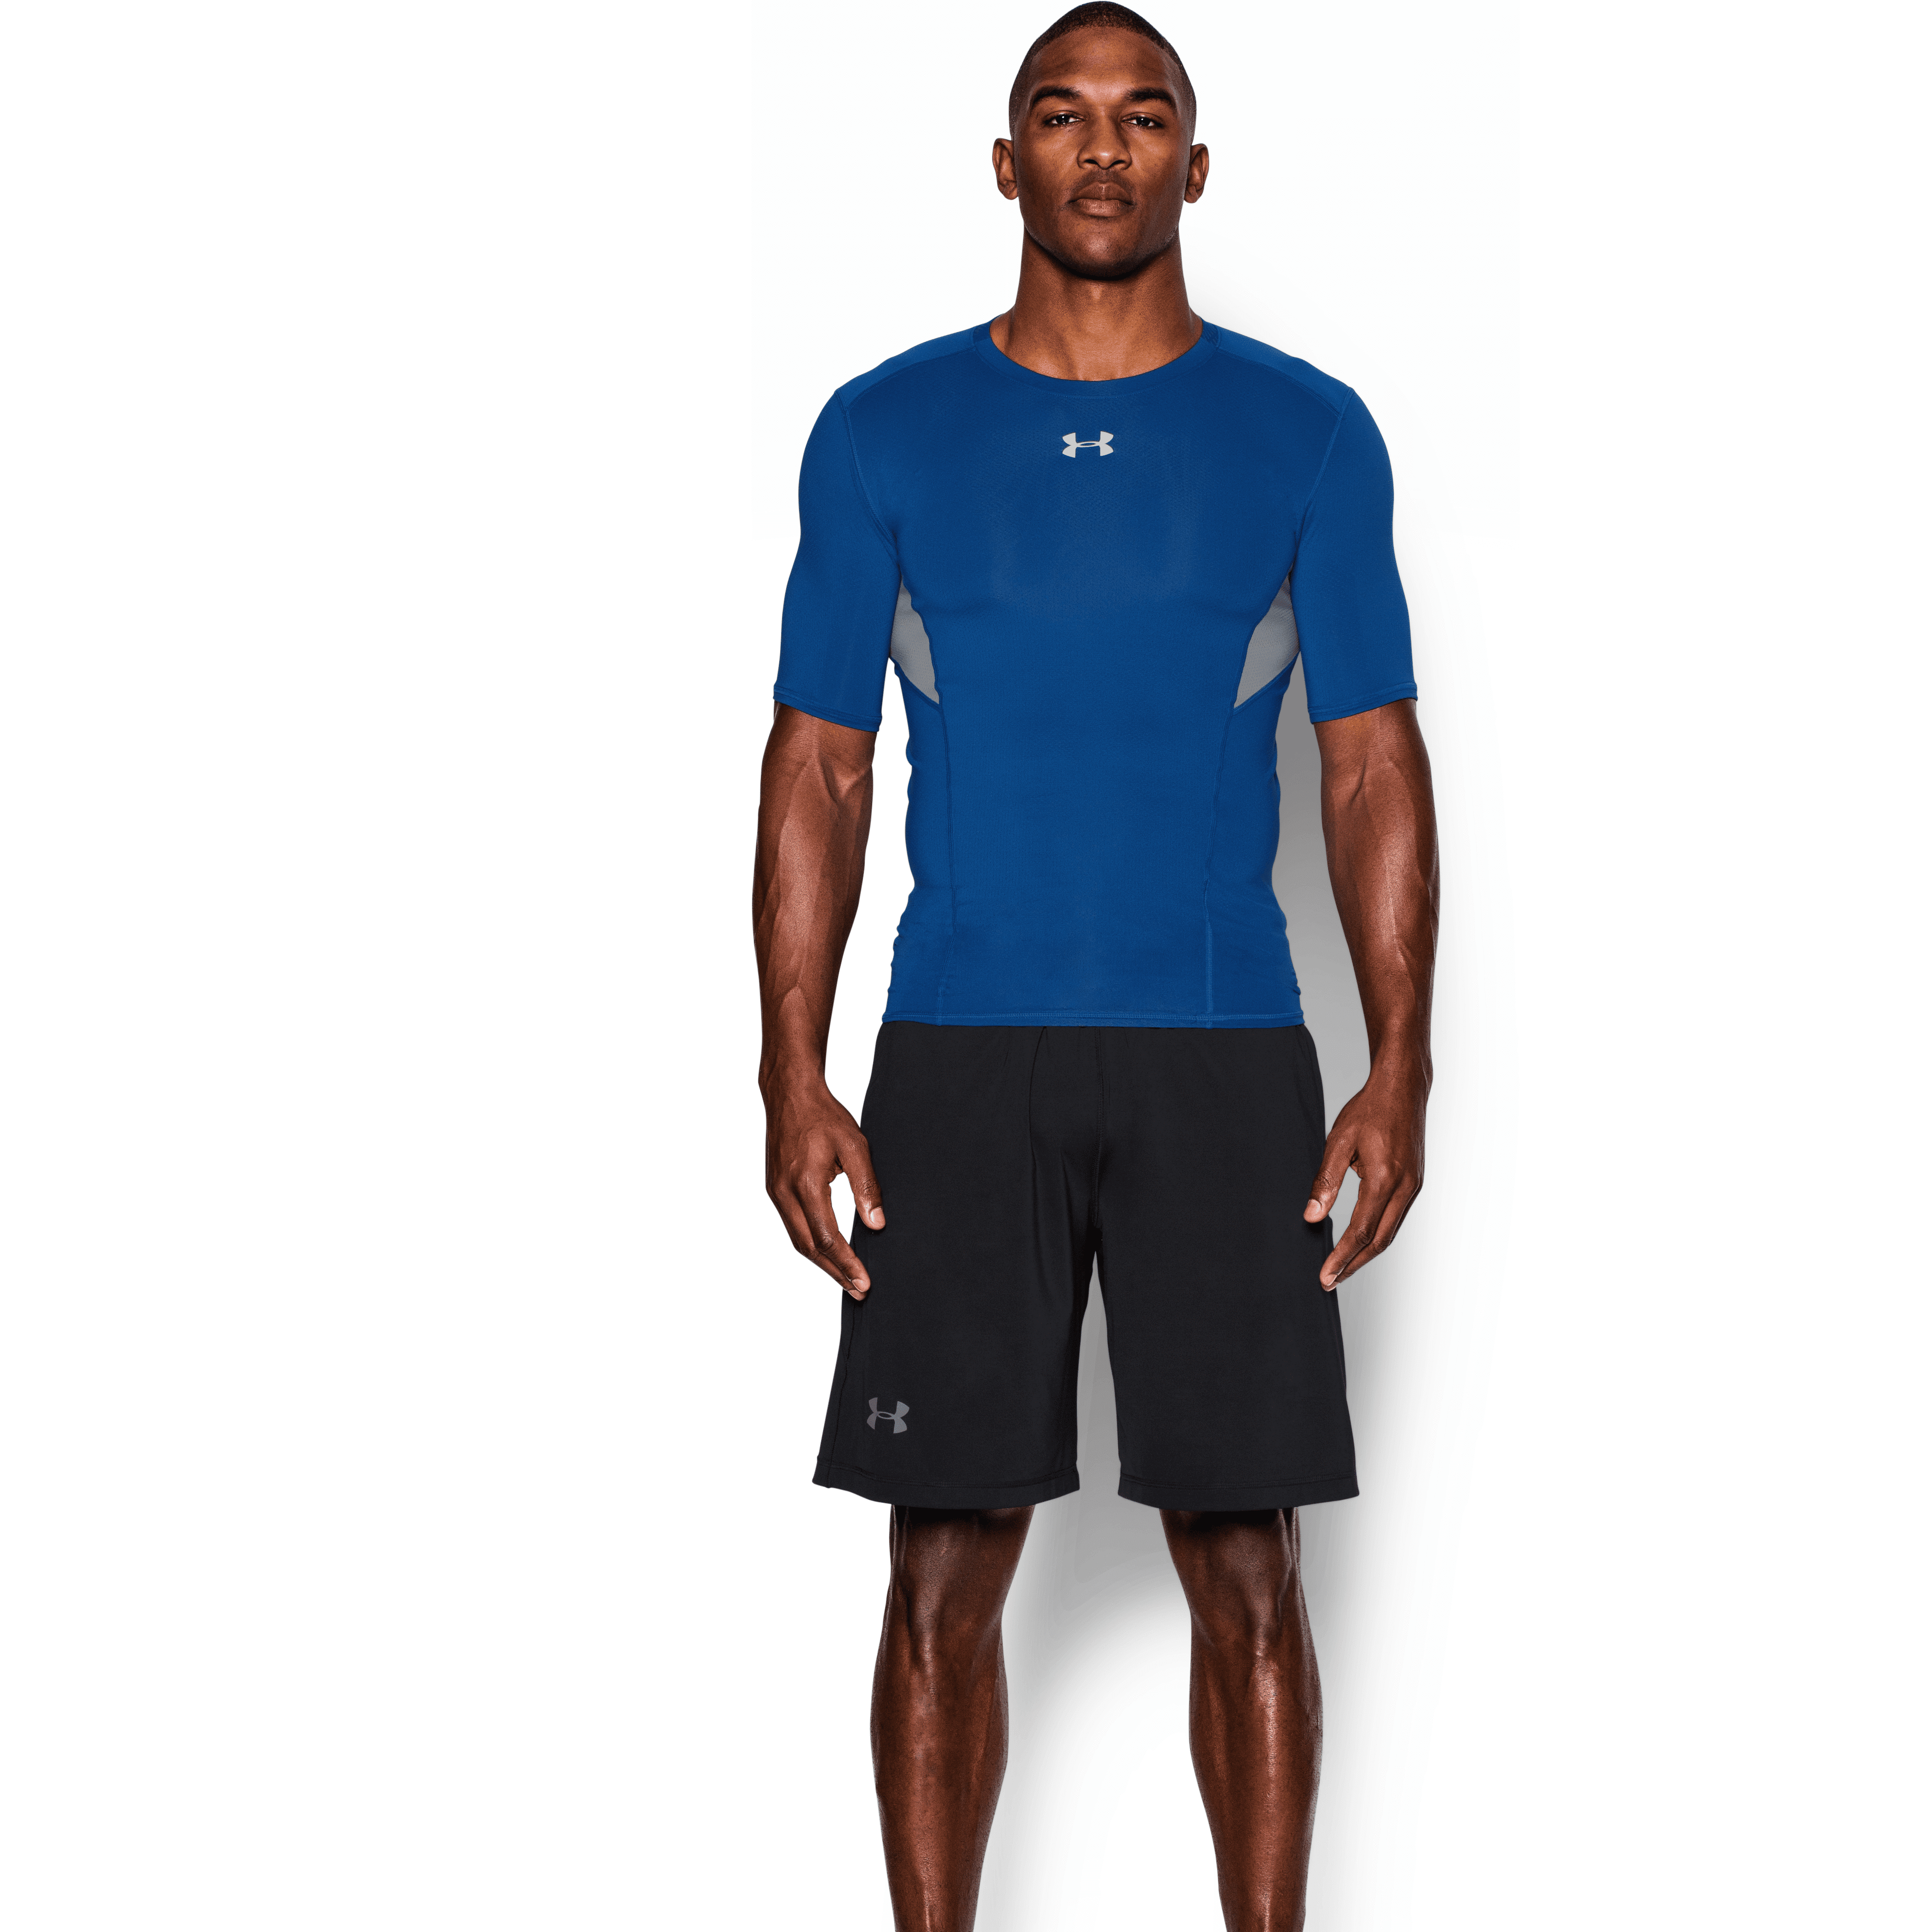 Under Armour Mens Coolswitch Power Sleeve Top